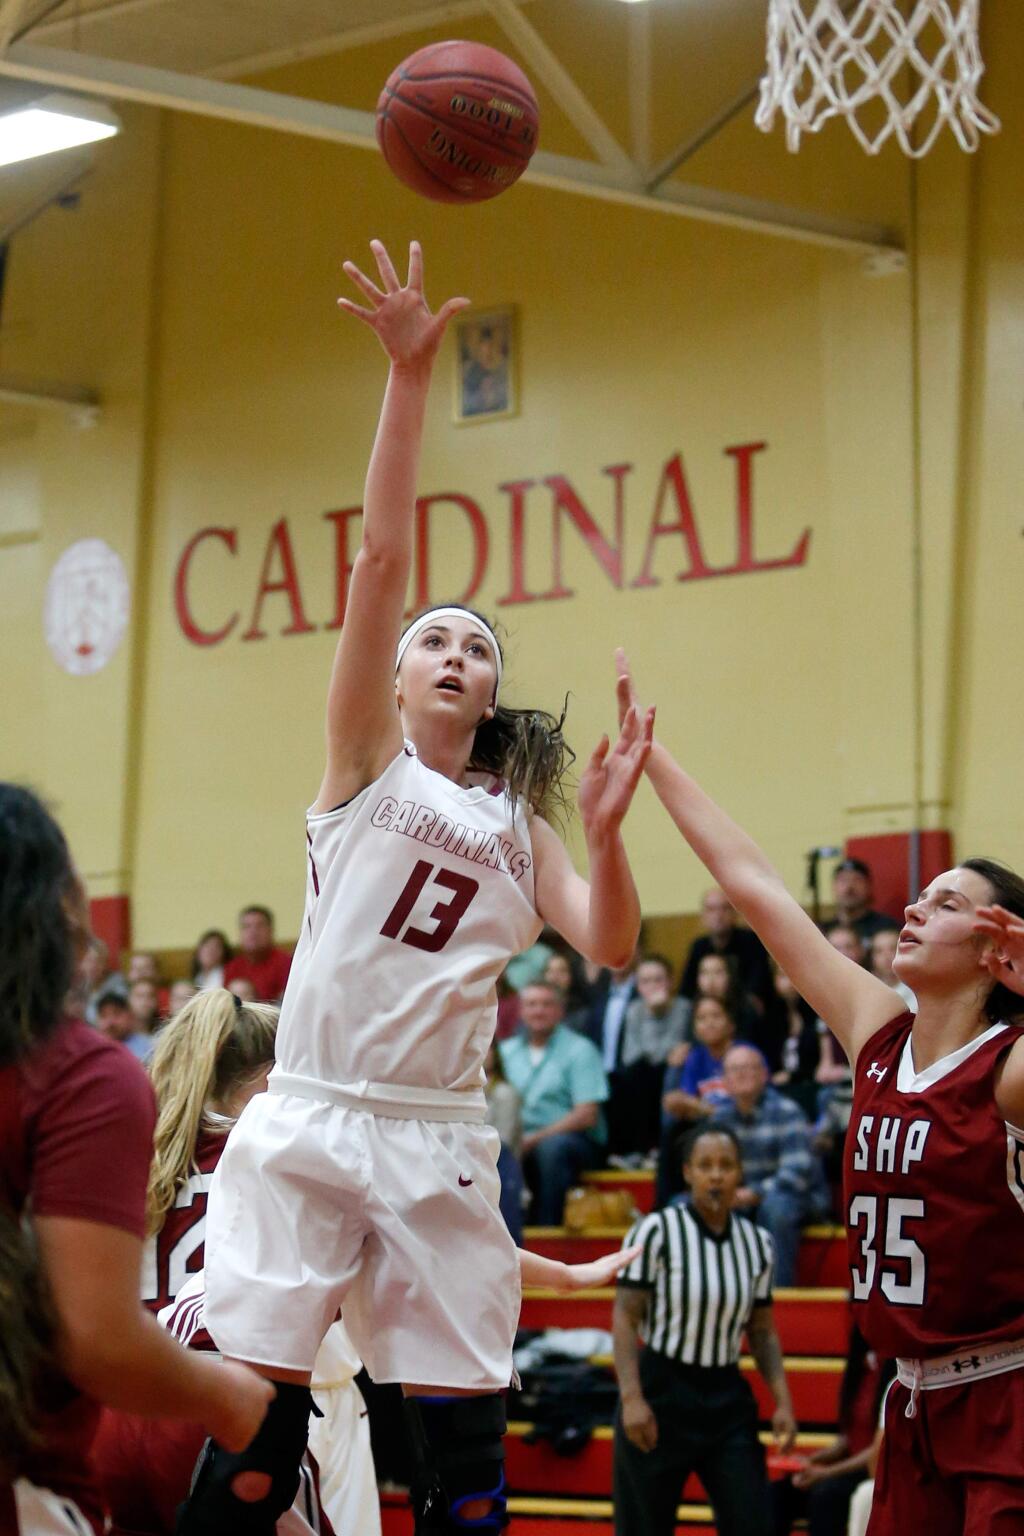 Cardinal Newman's Hailey Vice-Neat (13) gets open in the paint to score while defended by Sacred Heart's Zoe Zaharias (35), during the first half of the CIF NorCal Division 4 girls varsity basketball semifinal game between Sacred Heart Prep and Cardinal Newman high schools in Santa Rosa, California on Tuesday, March 15, 2016. (Alvin Jornada / The Press Democrat)